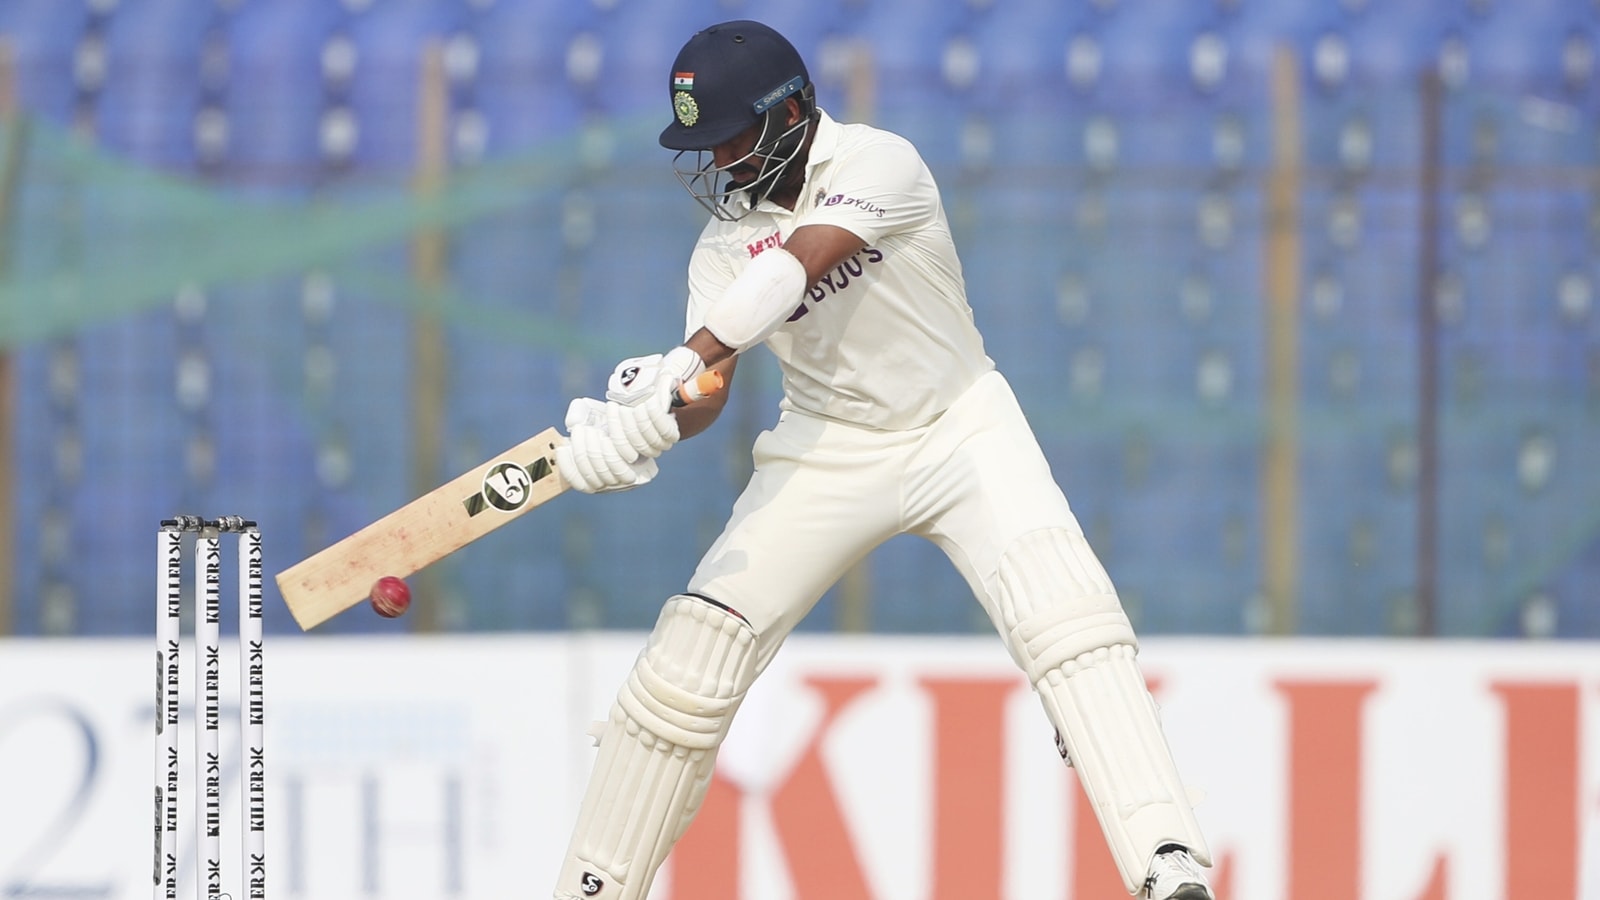 India vs Bangladesh Highlights 1st Test Day 3 Pujara, Gills tons keep India in drivers seat in Chattogram tie Hindustan Times